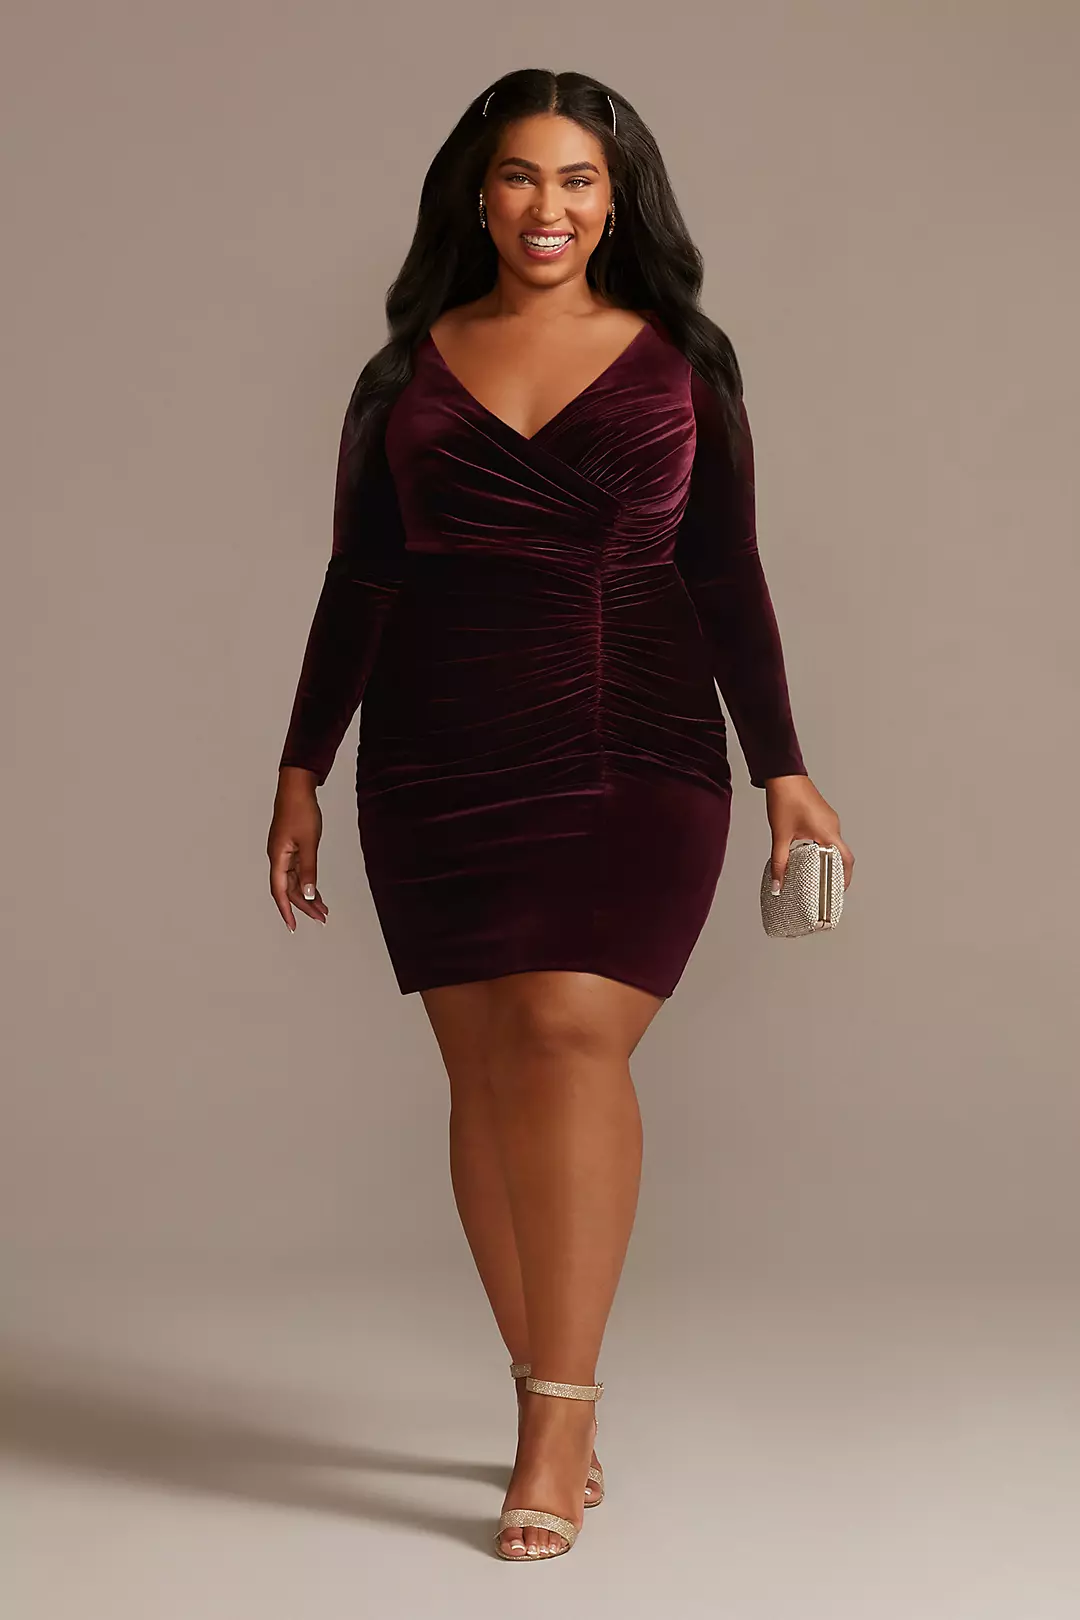 I'm plus size with thick thighs - I tried on a velvet dress styled